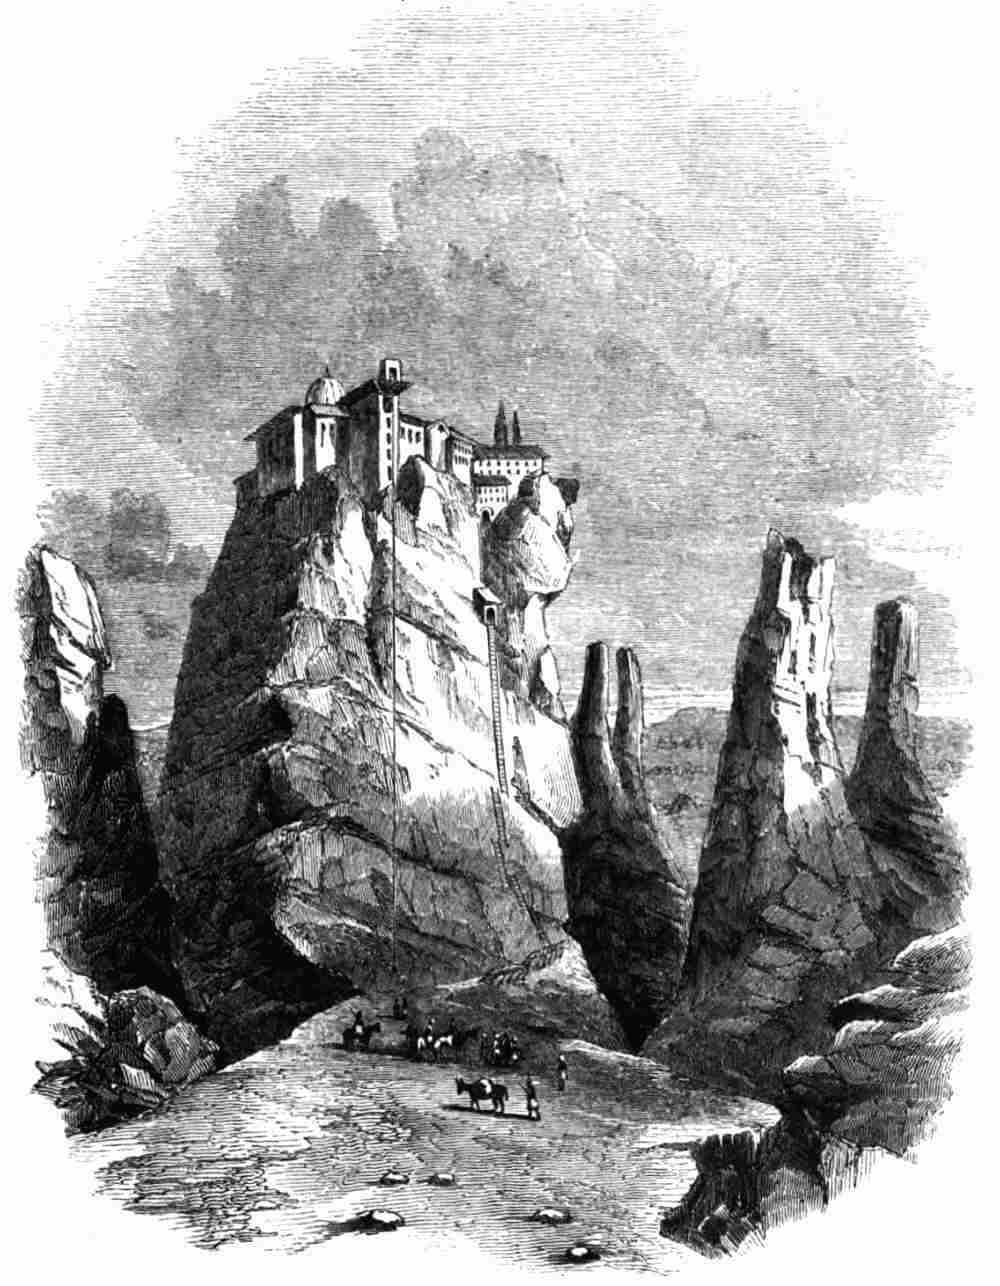 The Project Gutenberg eBook of Visits To Monasteries In The Levant, by Robert Curzon. image